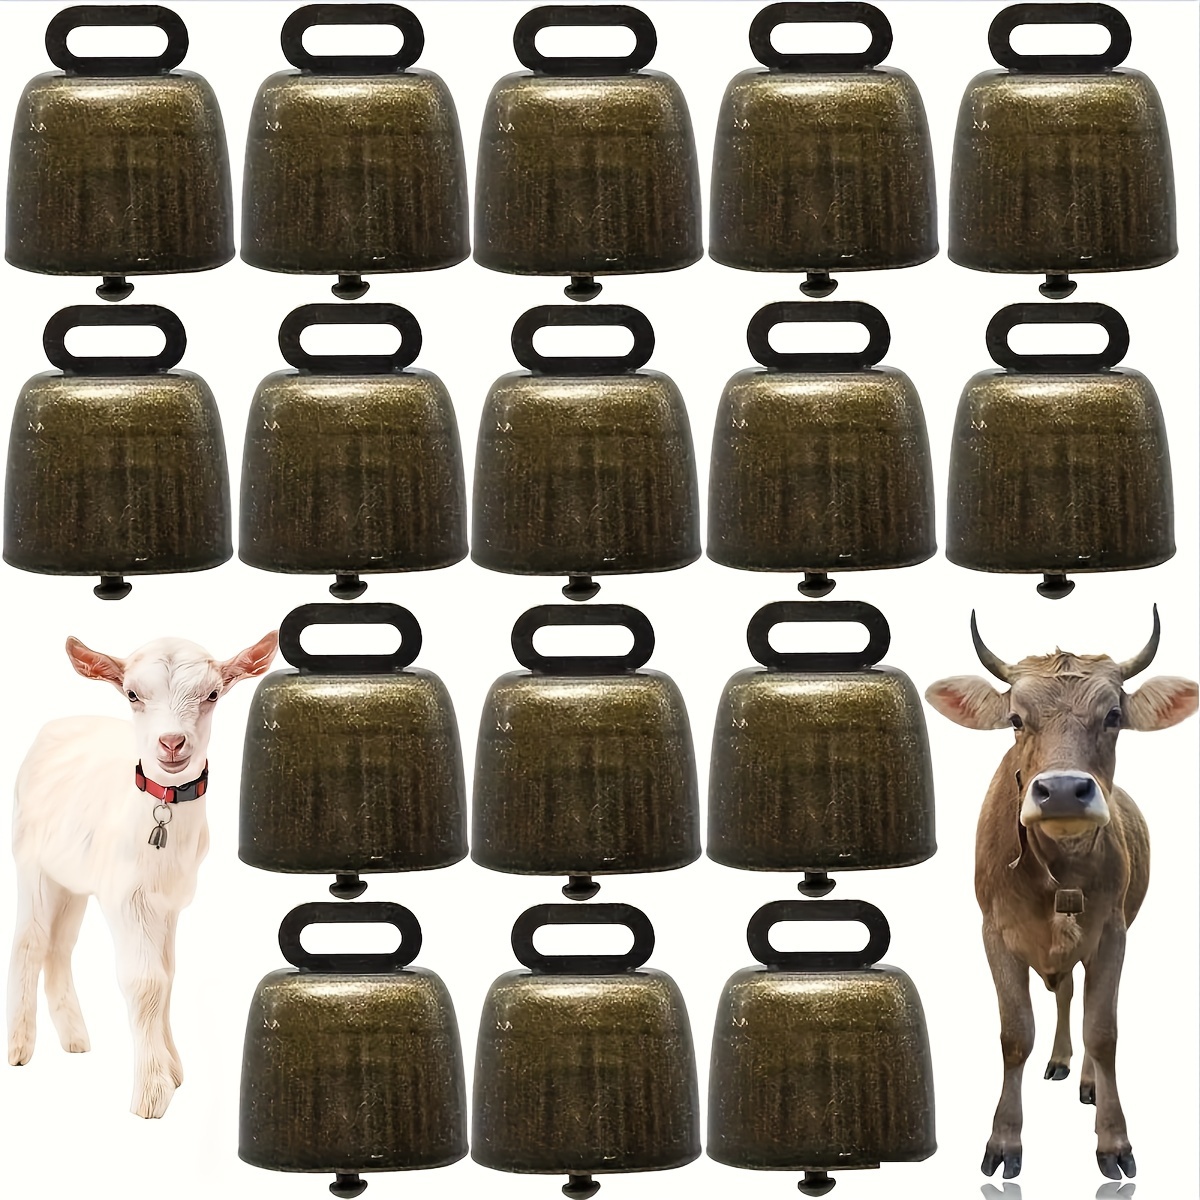 6 Pcs Metal Cow, Cowbell Retro for Horse Sheep Grazing Copper, Cow Bells  Noise Makers 